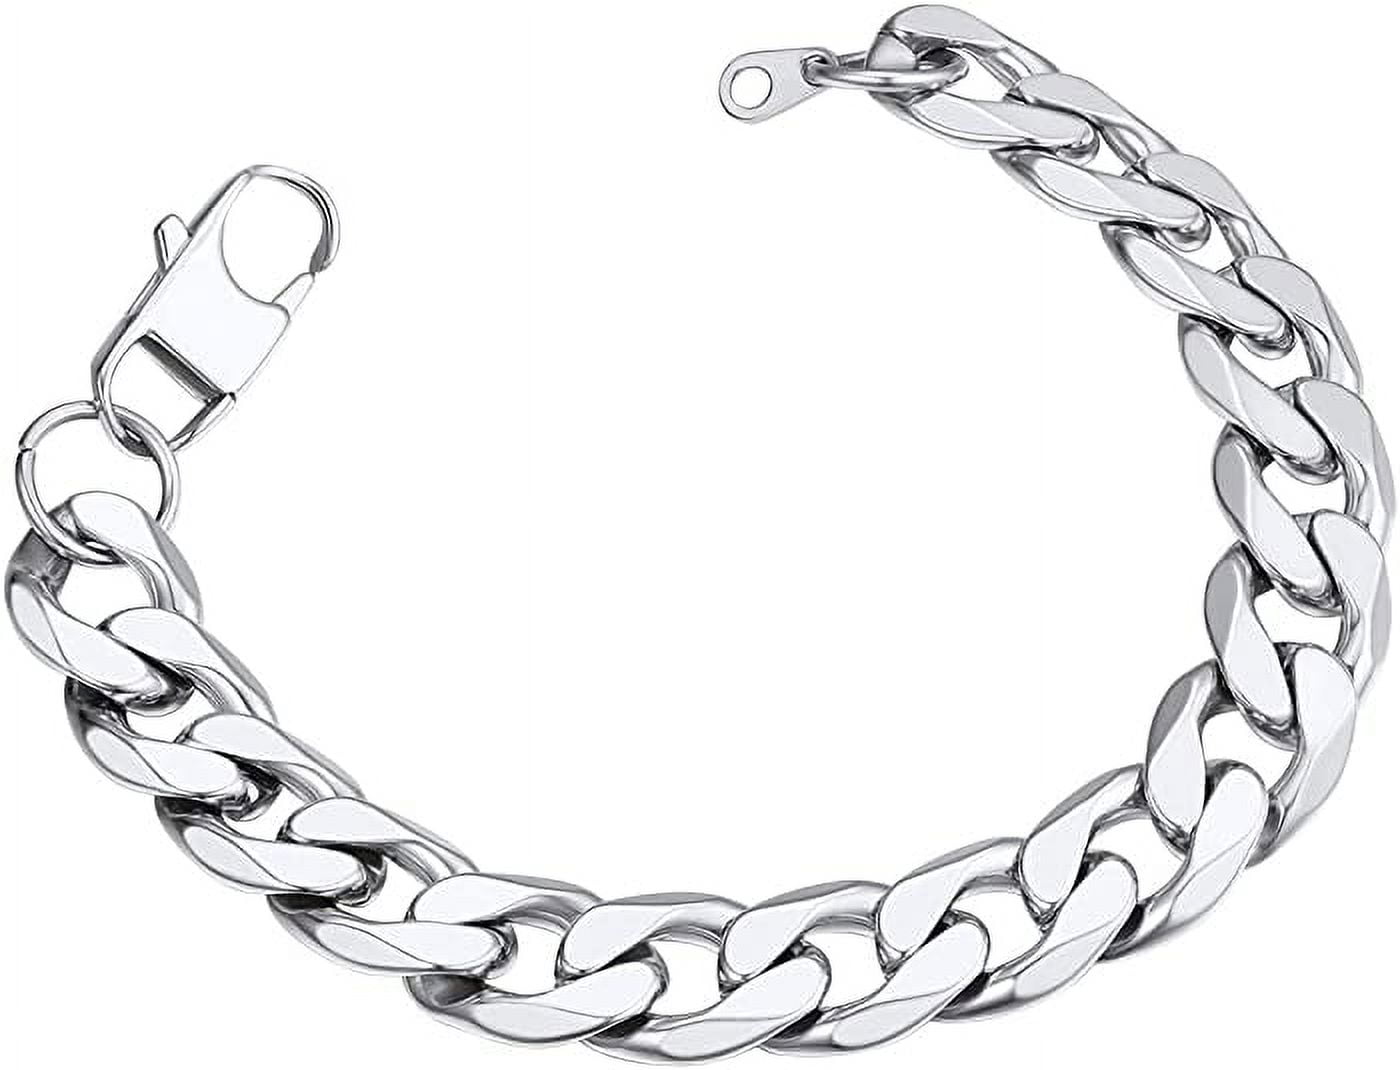 ChainsProMax Stainless Steel Bracelet Mens Wrist Chain 13mm 7.5 inch ...